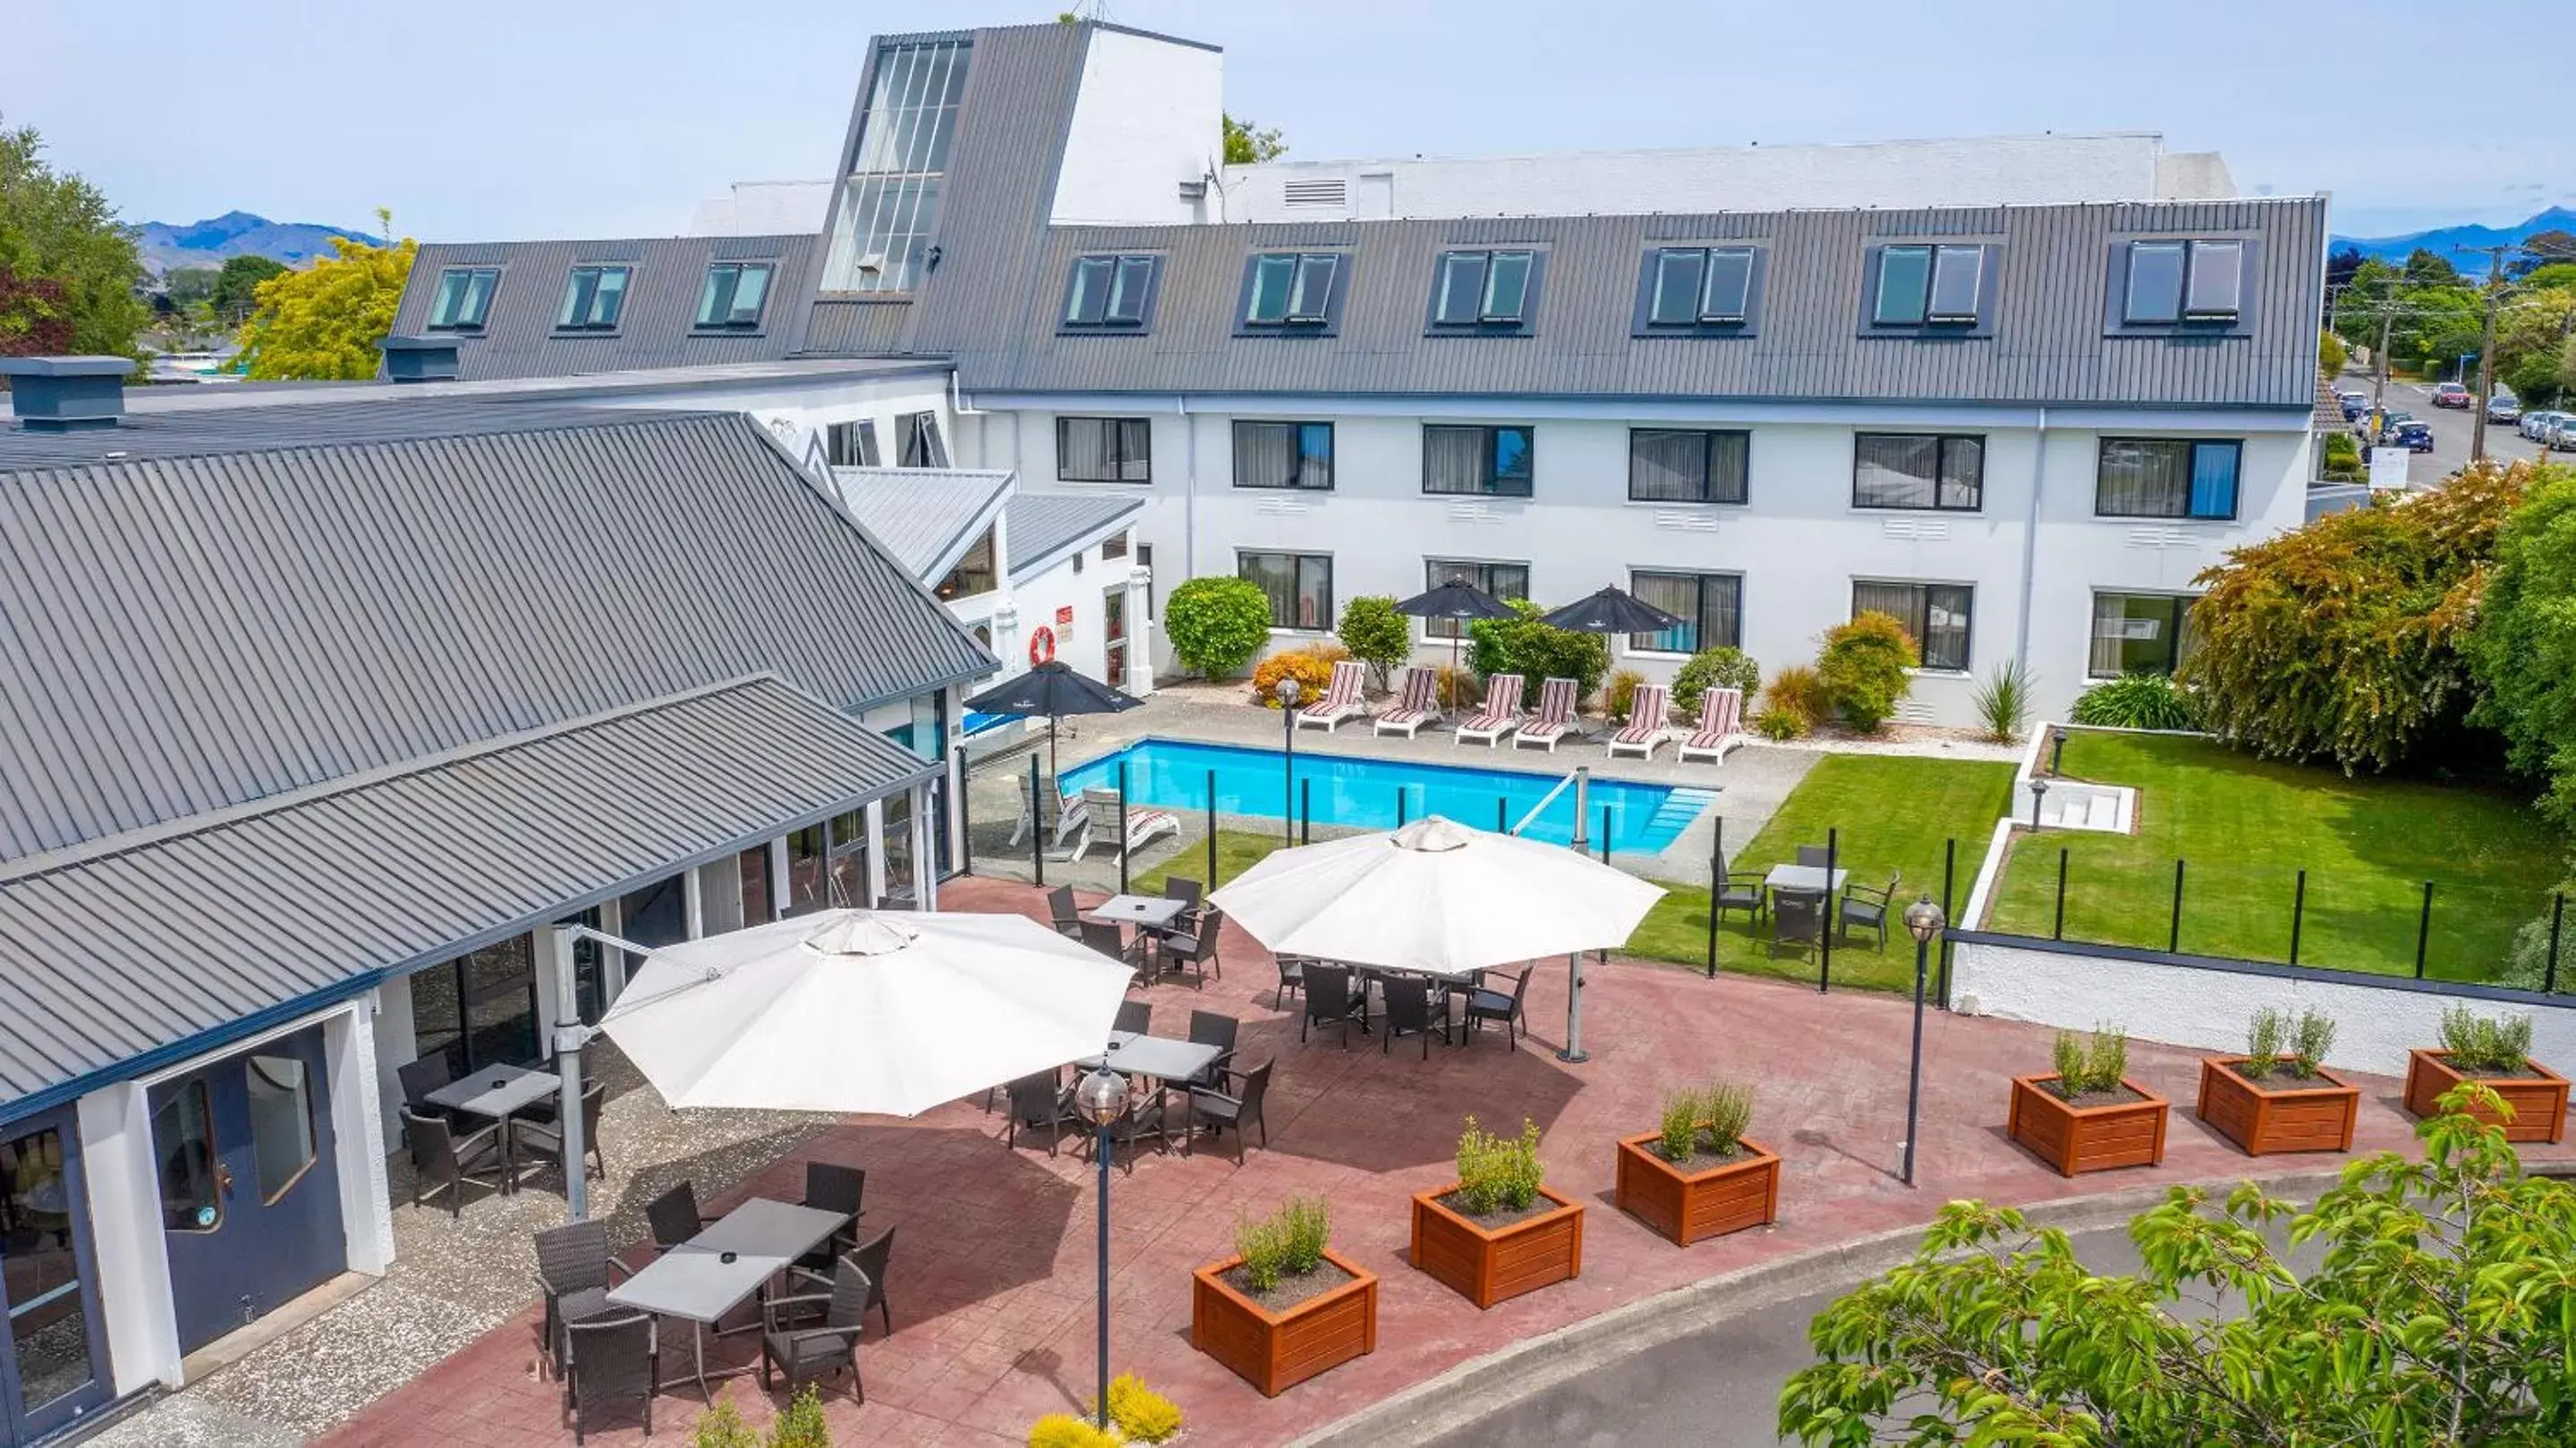 Property building, Pool View in Scenic Hotel Marlborough